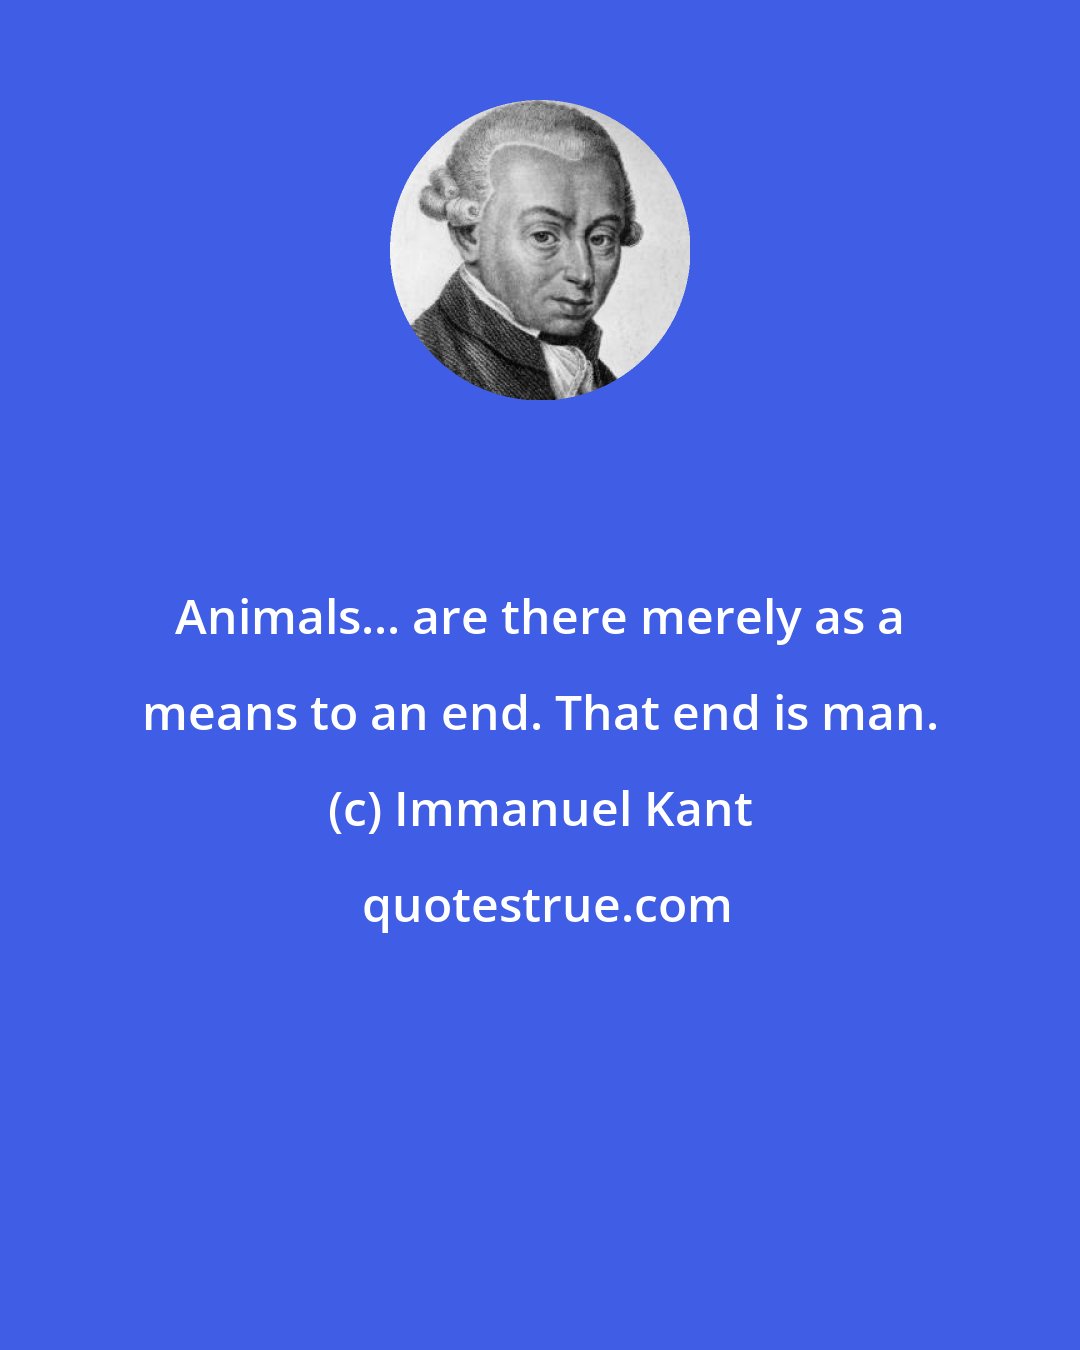 Immanuel Kant: Animals... are there merely as a means to an end. That end is man.